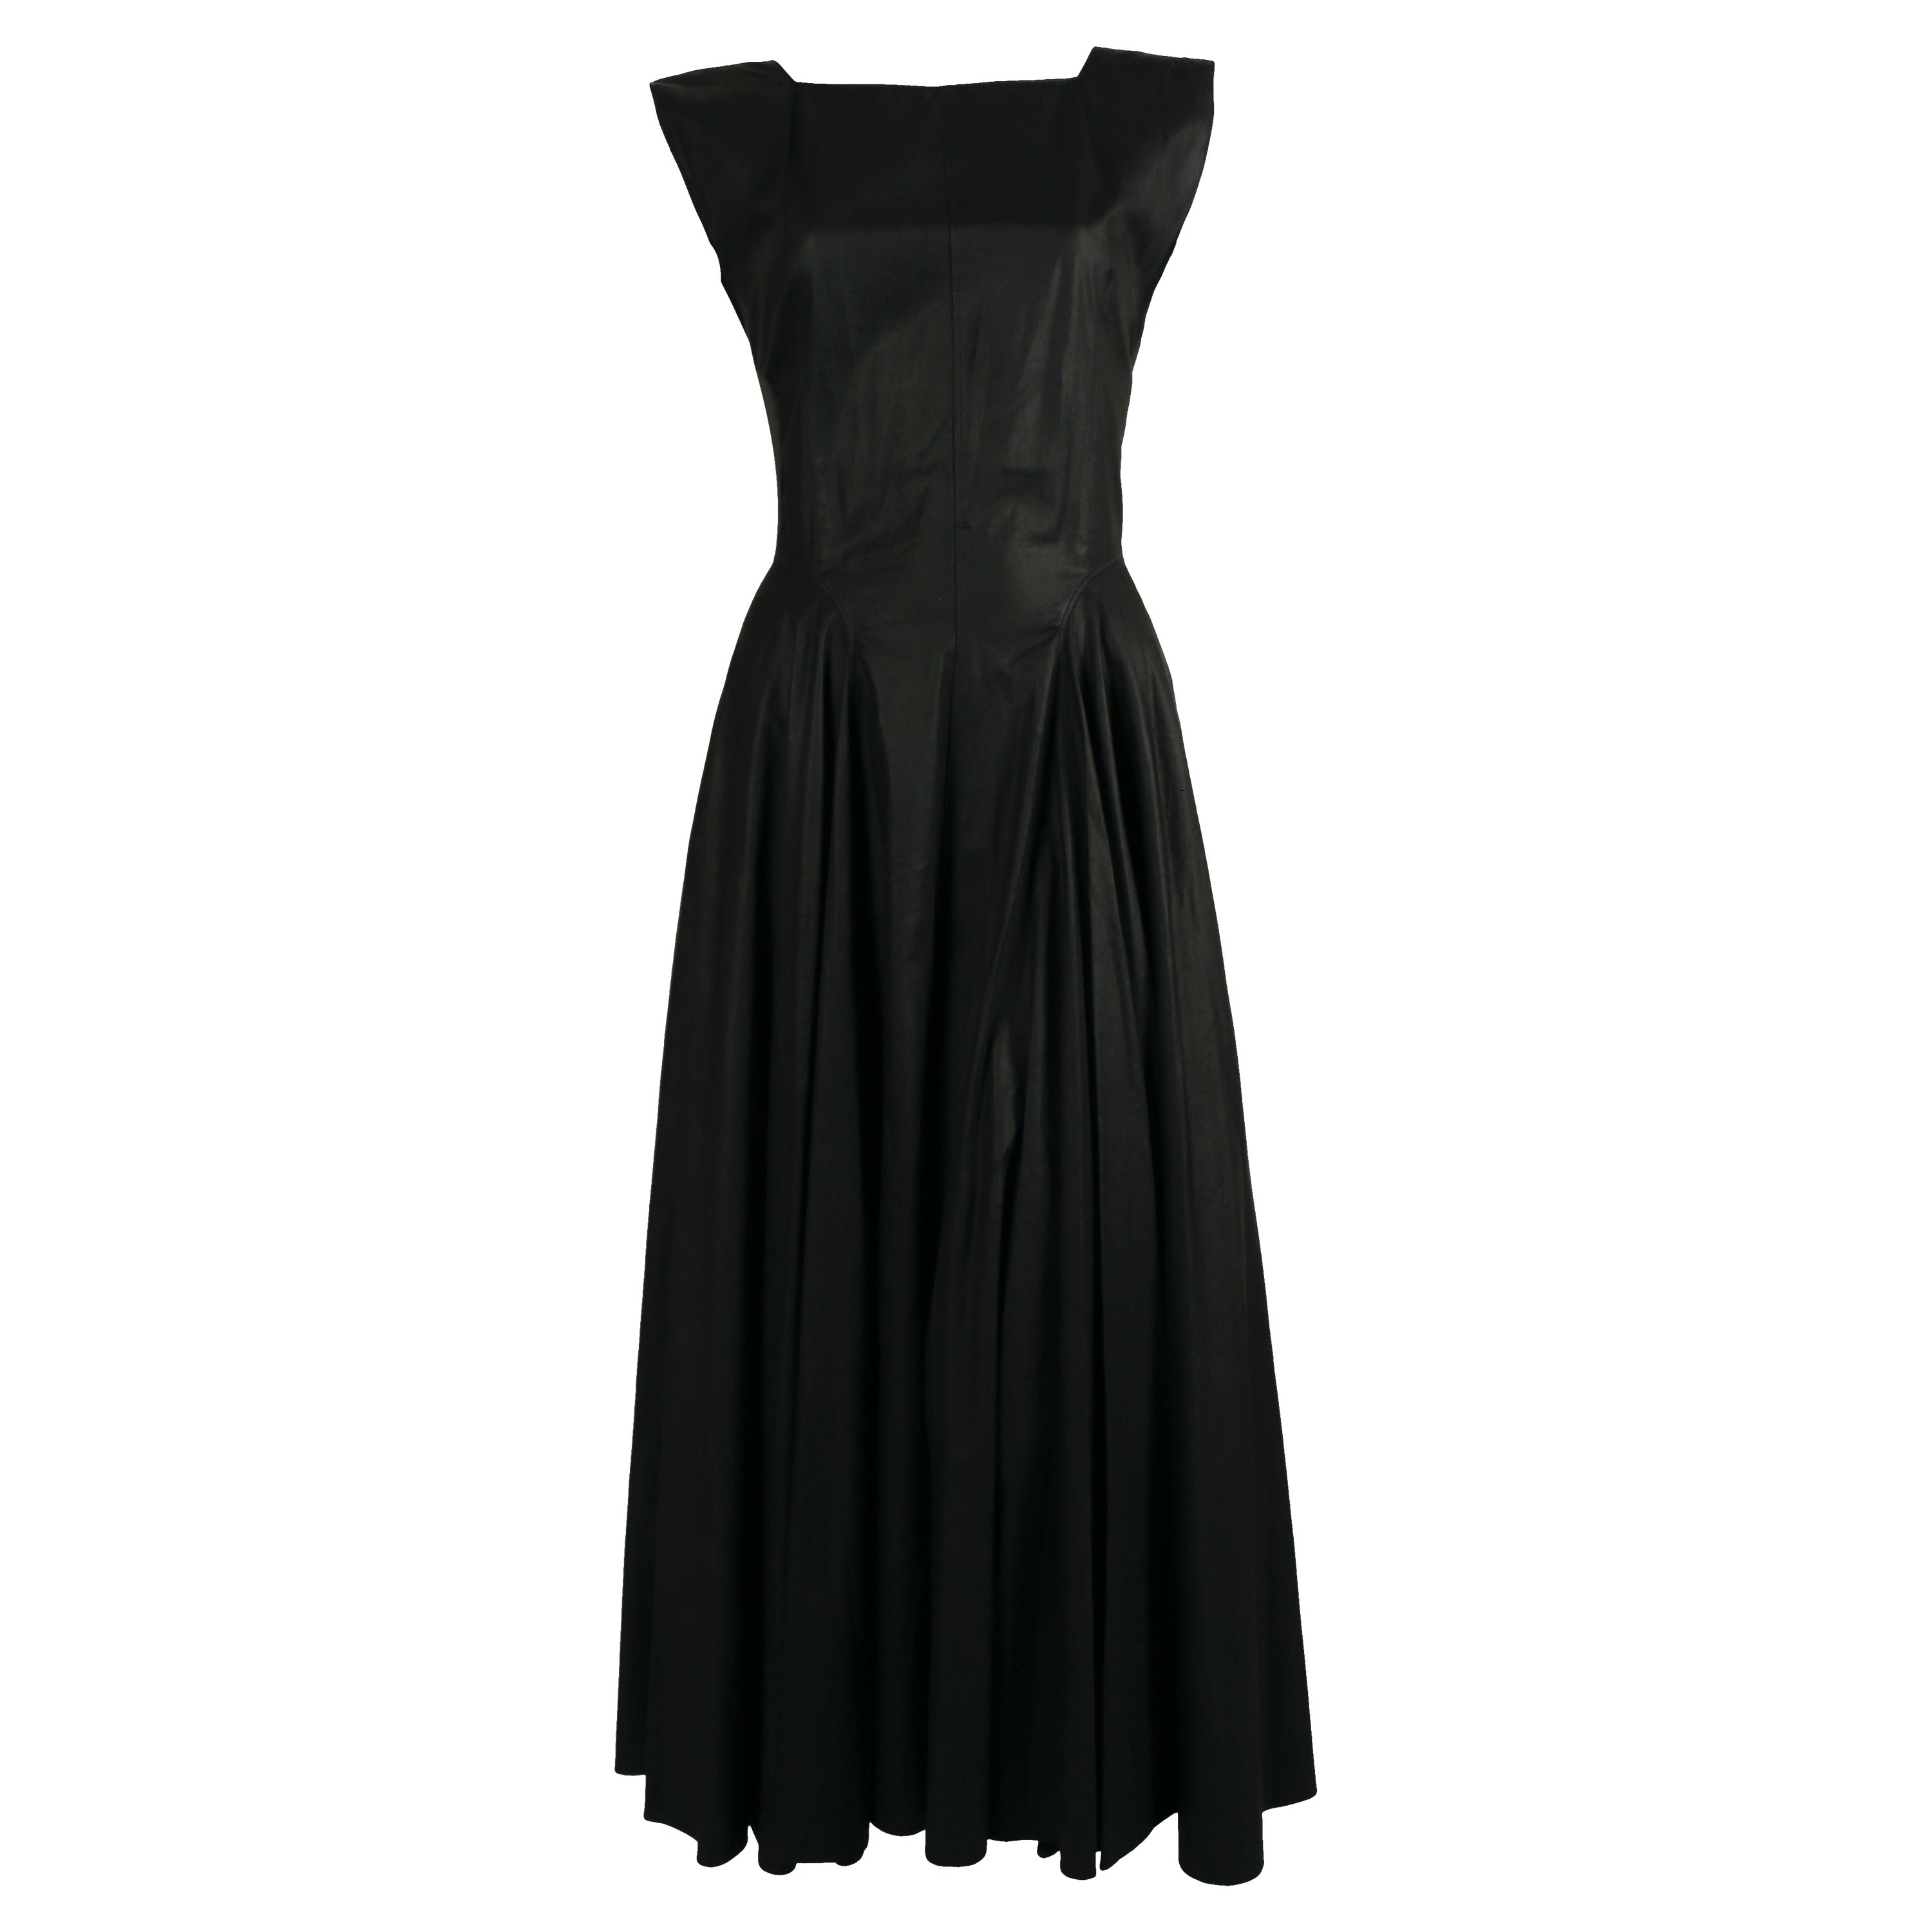 1980's AZZEDINE ALAIA black seamed dress with full skirt For Sale